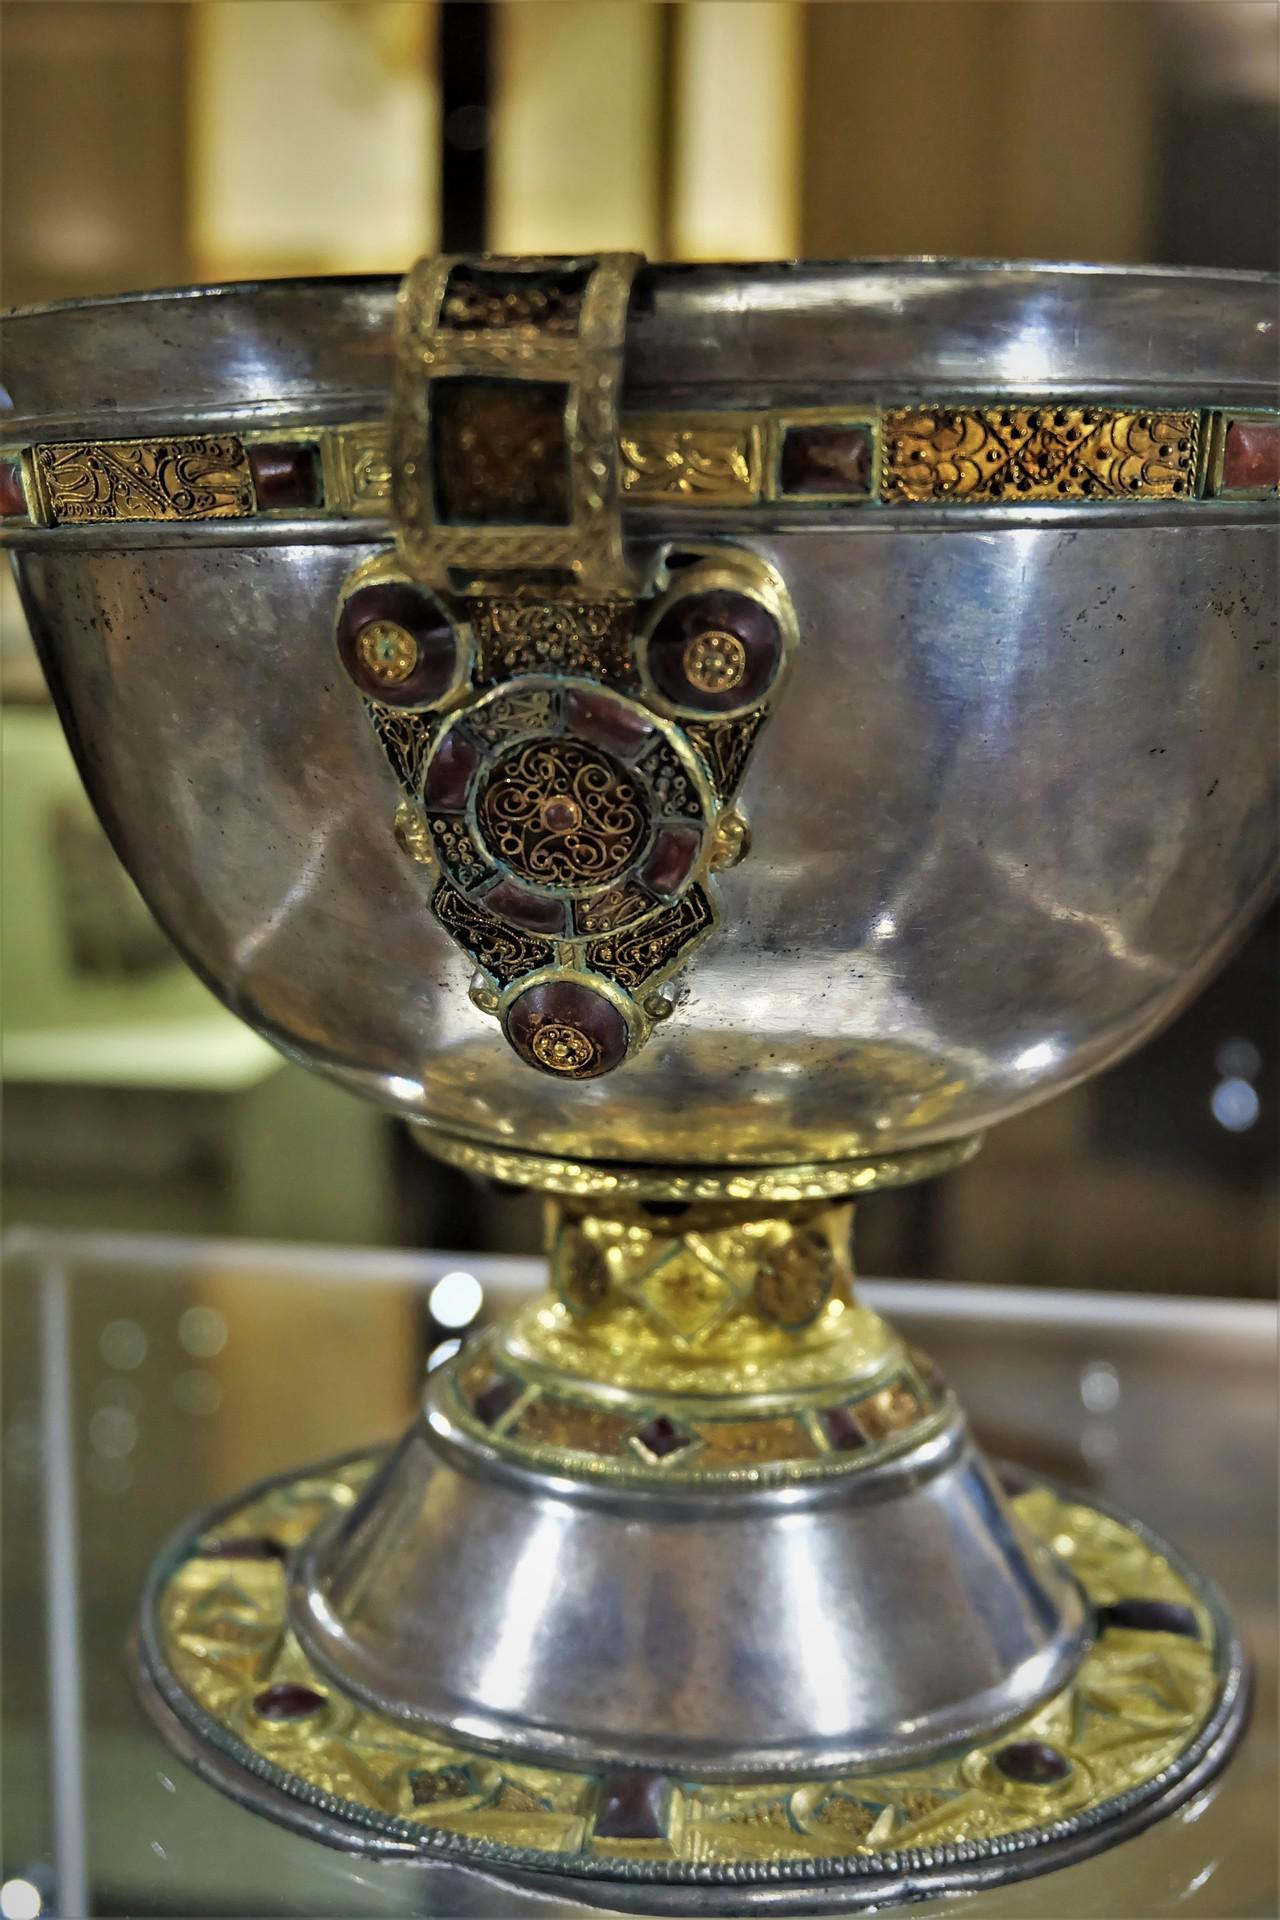 A Silver Chalice from County Tipperary, Republic of Ireland, dated around the 9th century. Displayed at the National Museum of Ireland-Archaeology in Dublin.jpg